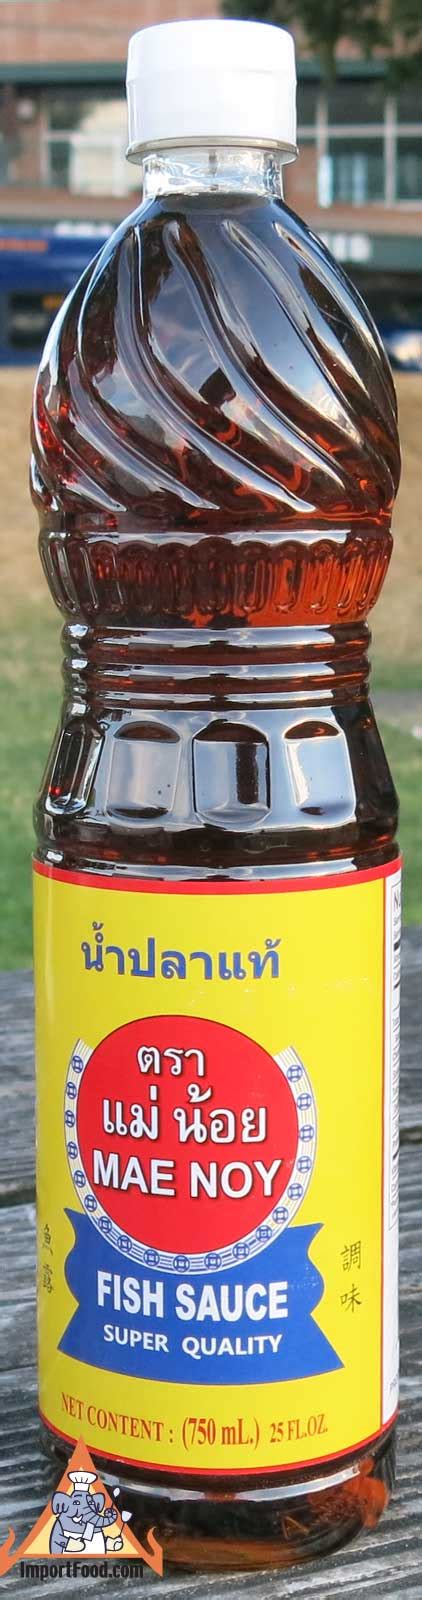 The benefits of eating fish. Thai fish sauce, Tiparos brand - No Longer Allowed Entry ...